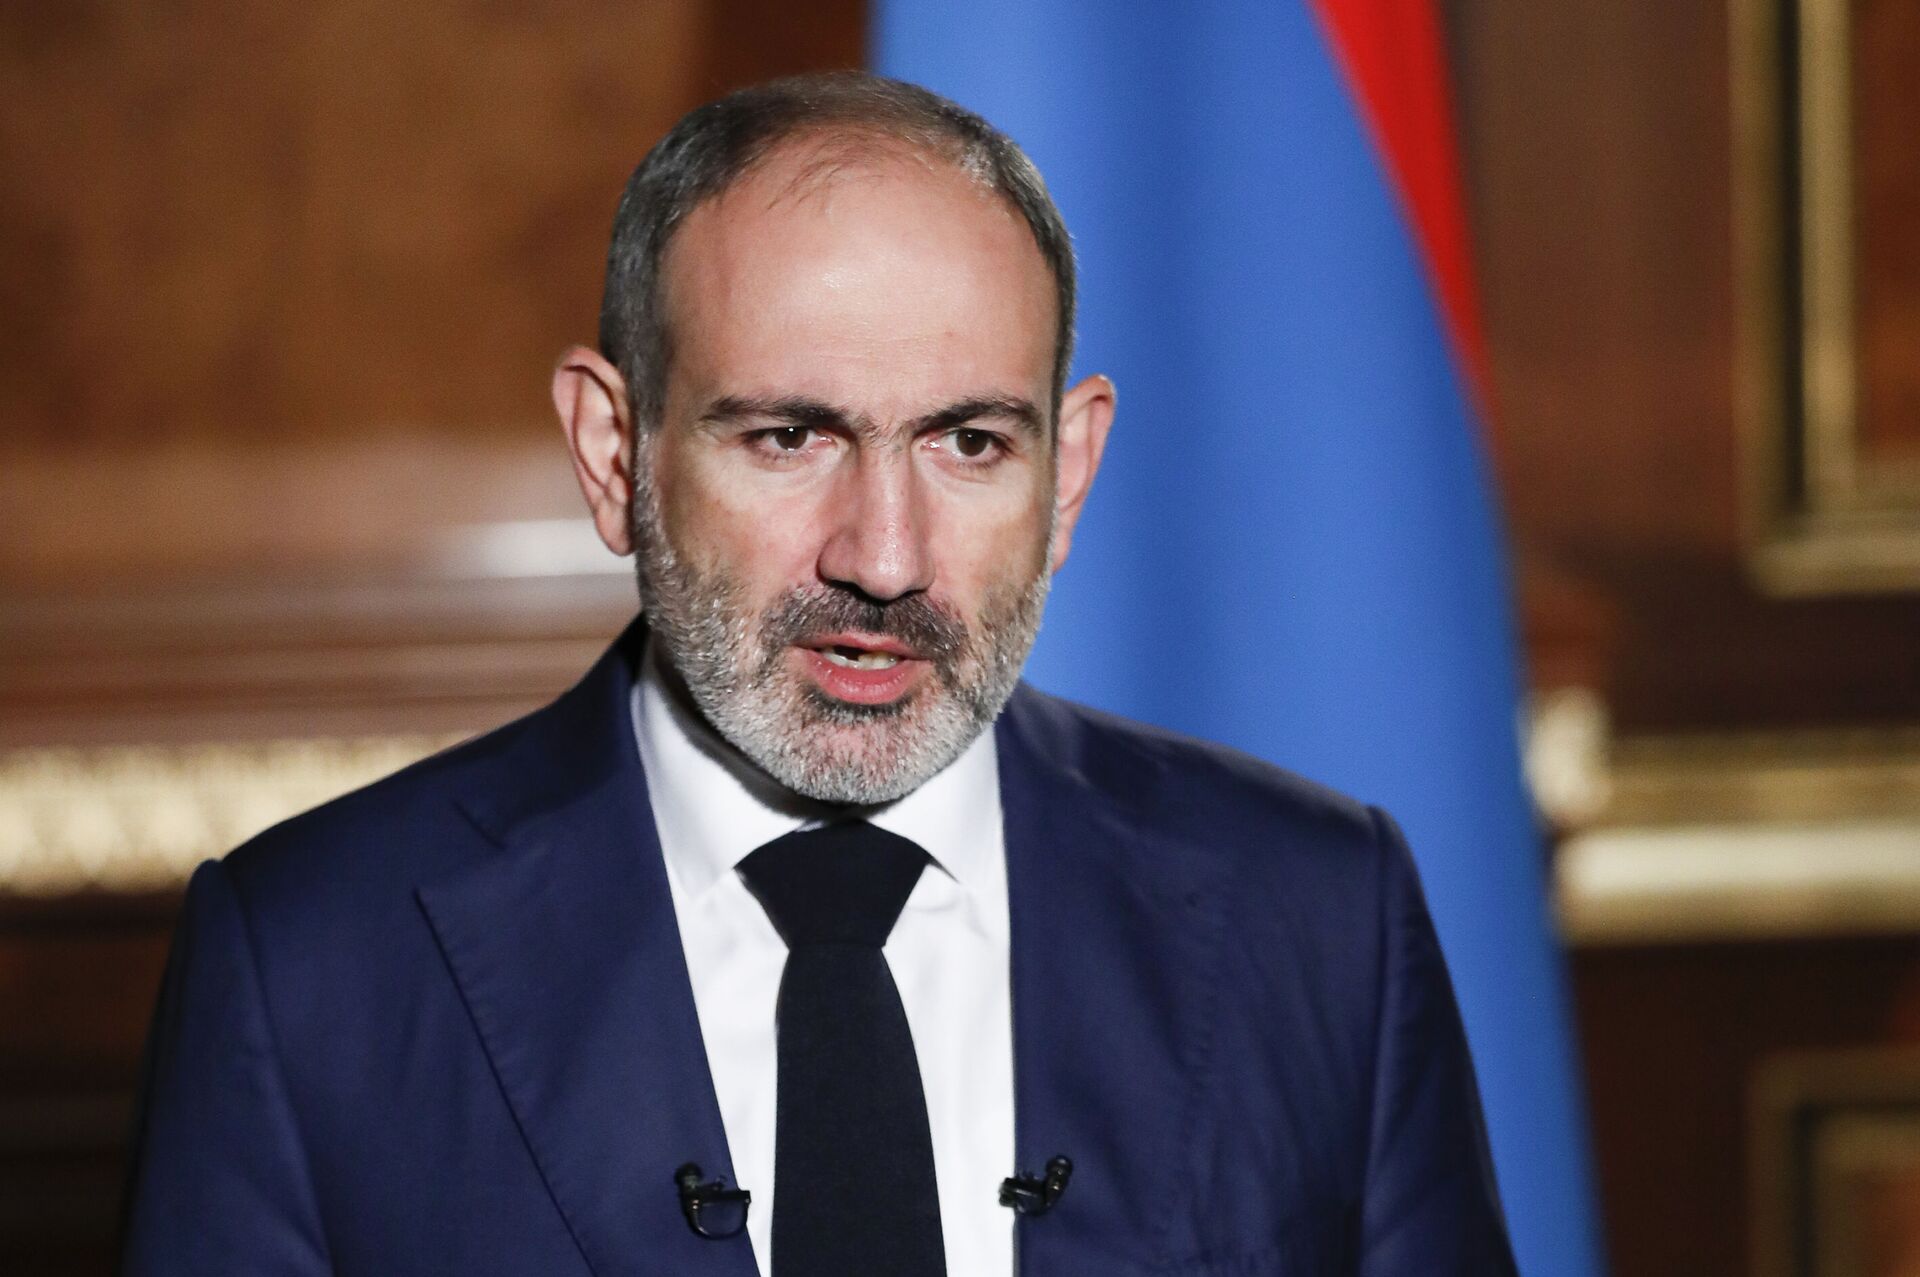 Pashinyan Says Yerevan Handed Over 'Substantial, But Small' Part of Minefield Maps to Baku - Sputnik International, 1920, 13.06.2021